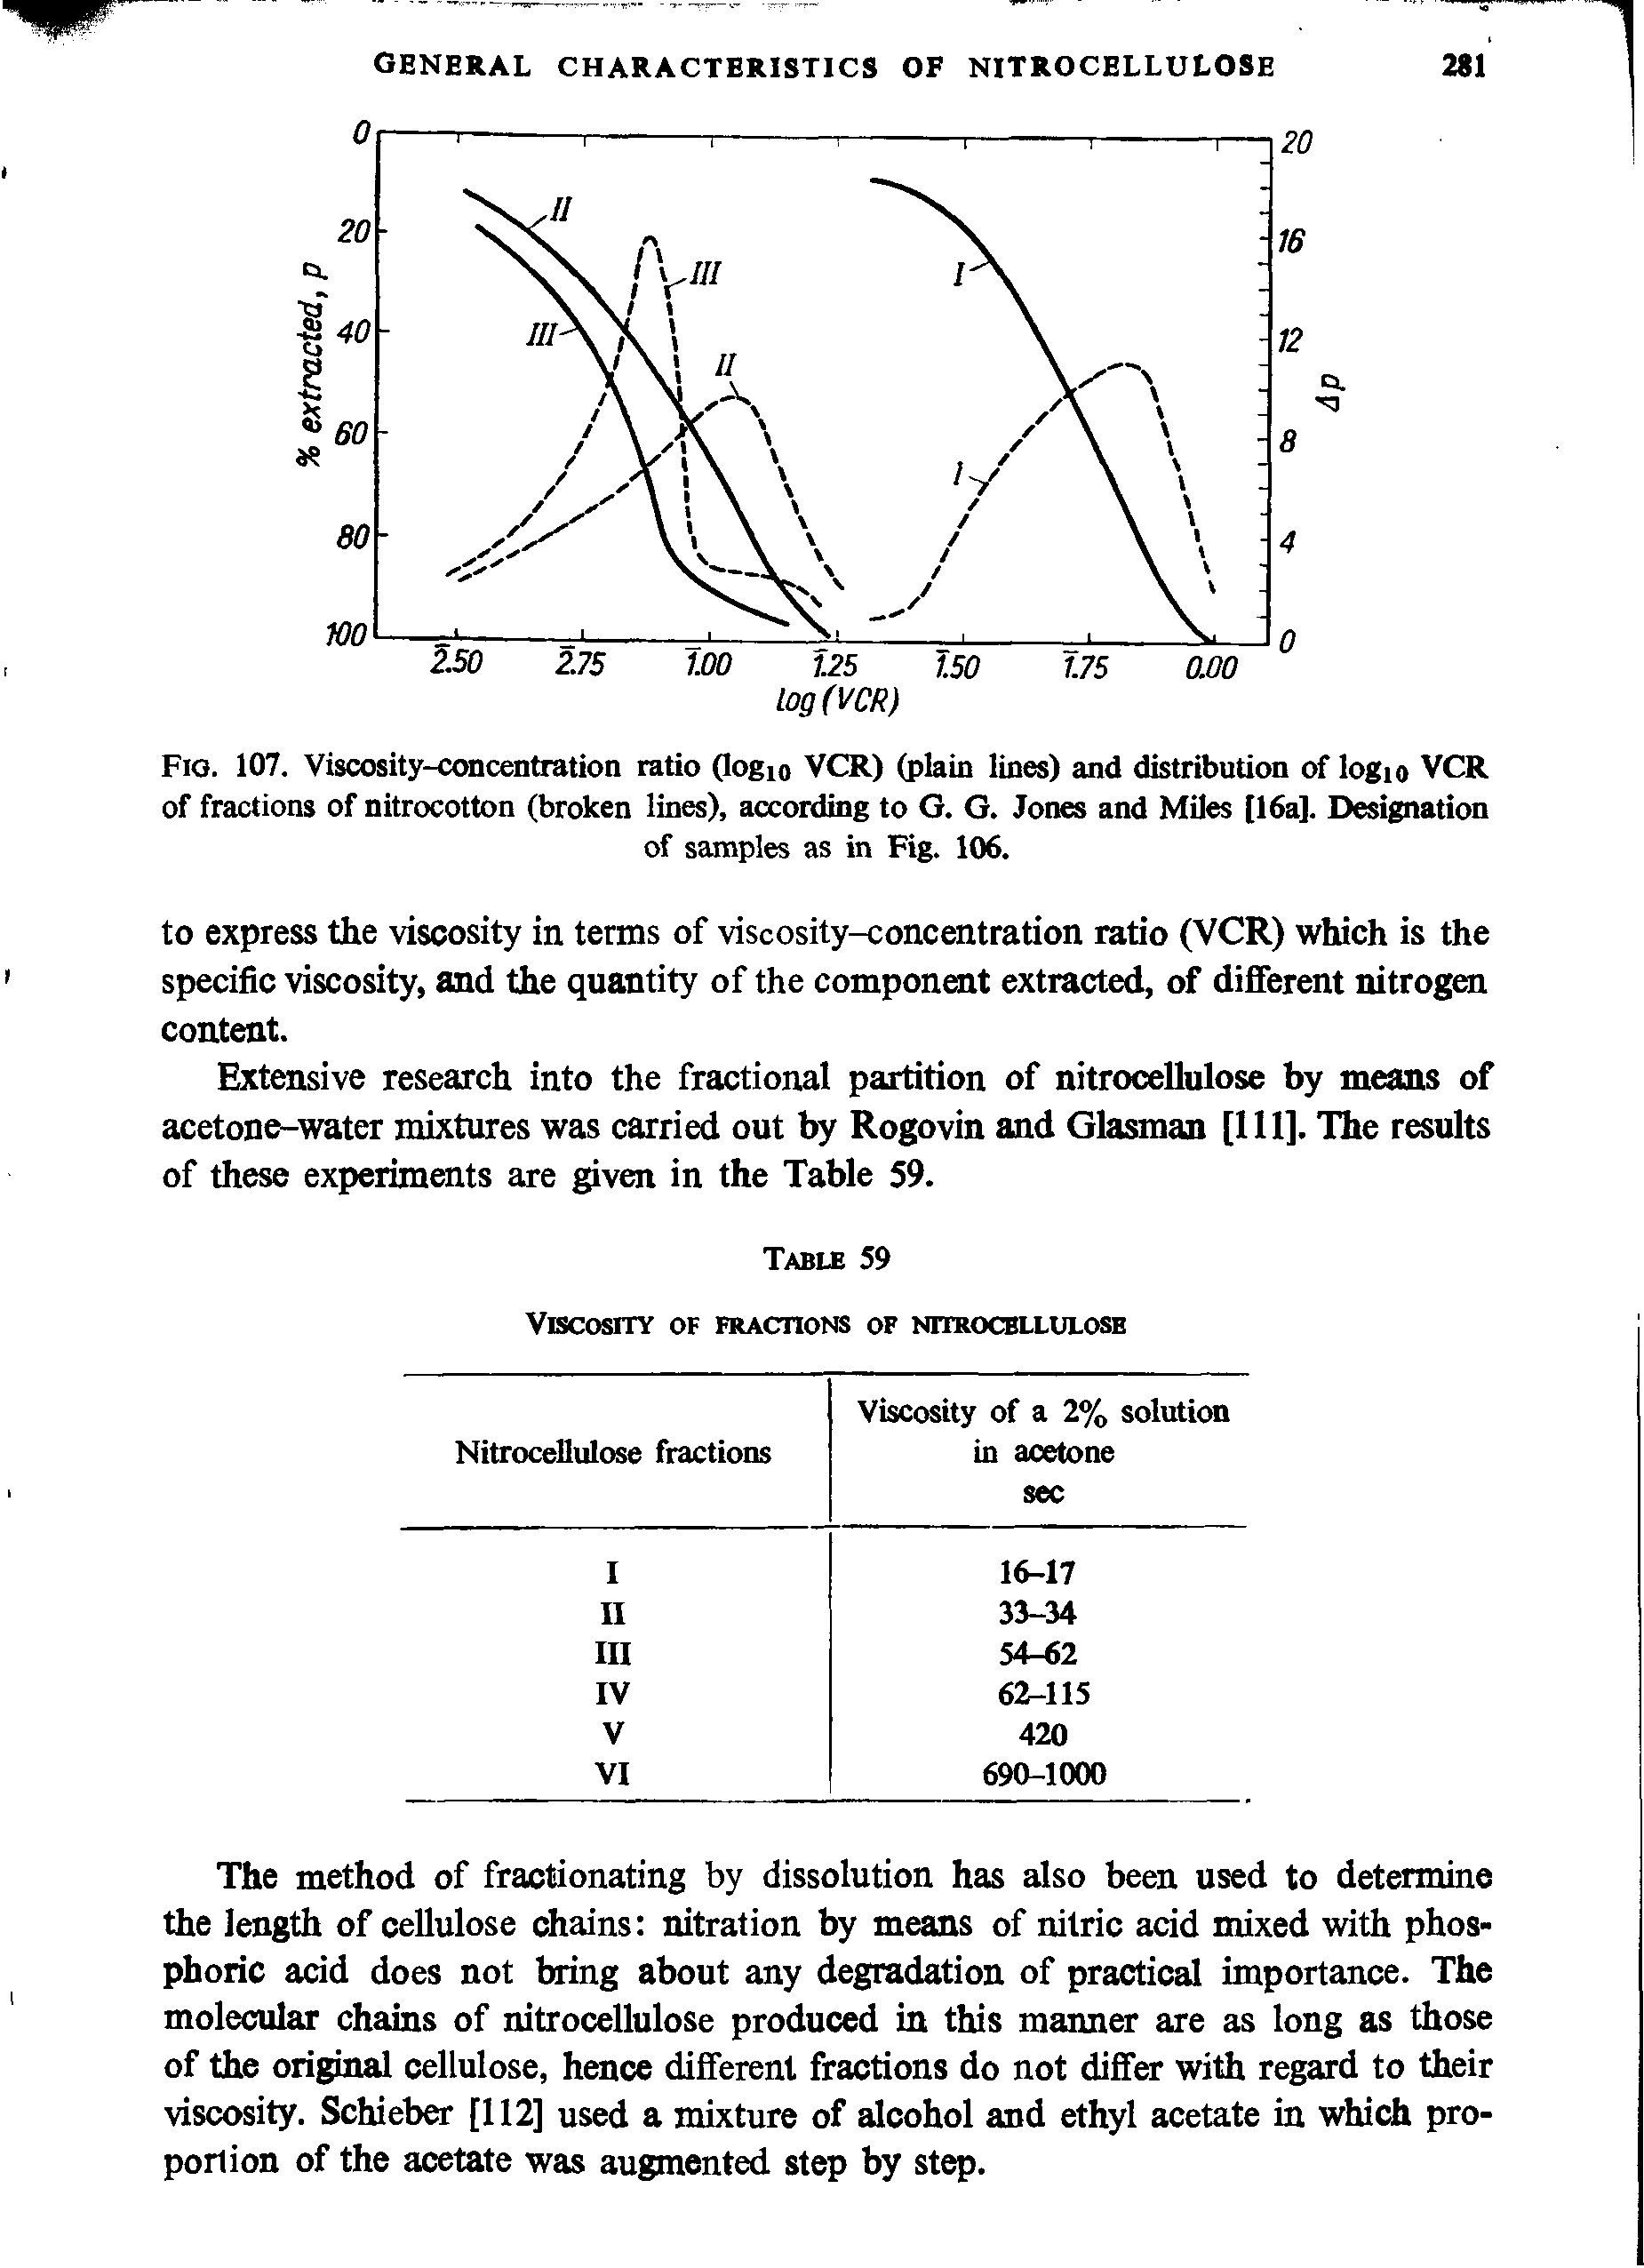 Fig. 107. Viscosity-concentration ratio (togio VCR) (plain lines) and distribution of logio VCR of fractions of nitrocotton (broken lines), according to G. G. Jones and Miles [16a]. Designation...